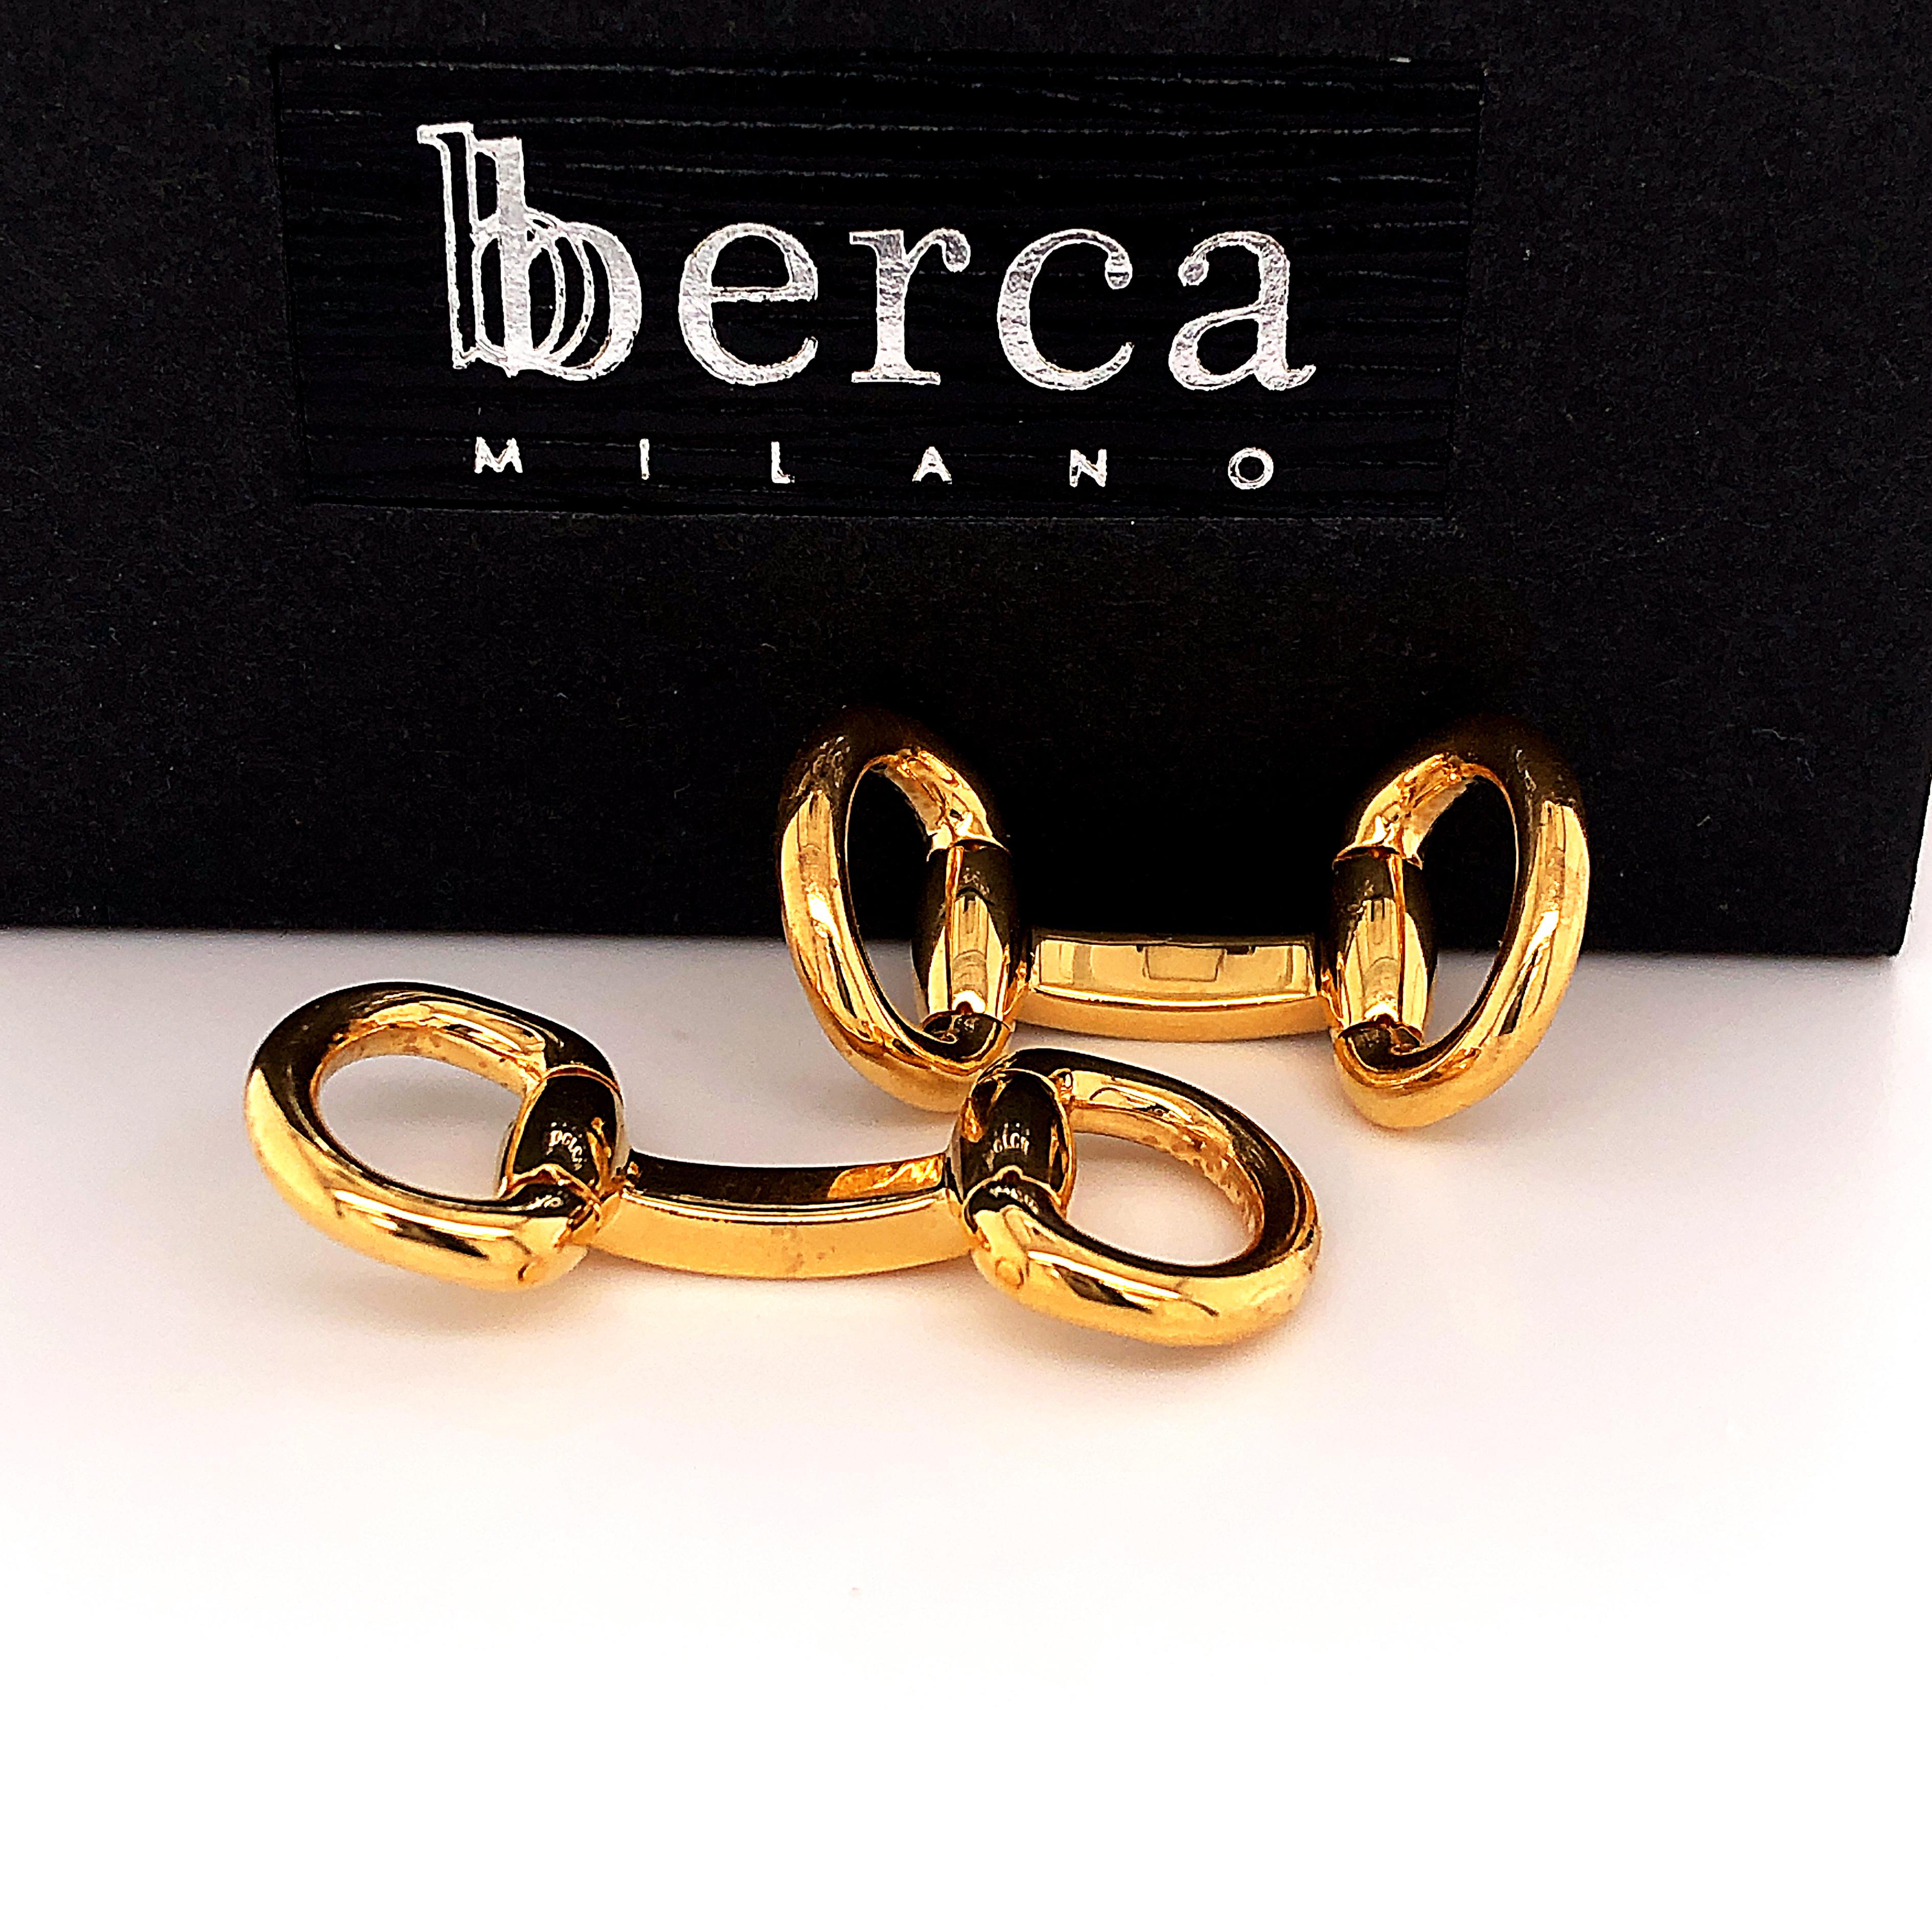 Chic yet Timeless, Front and Back Stirrup Shaped Gold-Plated Solid Sterling Silver Cufflinks.

In our smart black box and pouch.